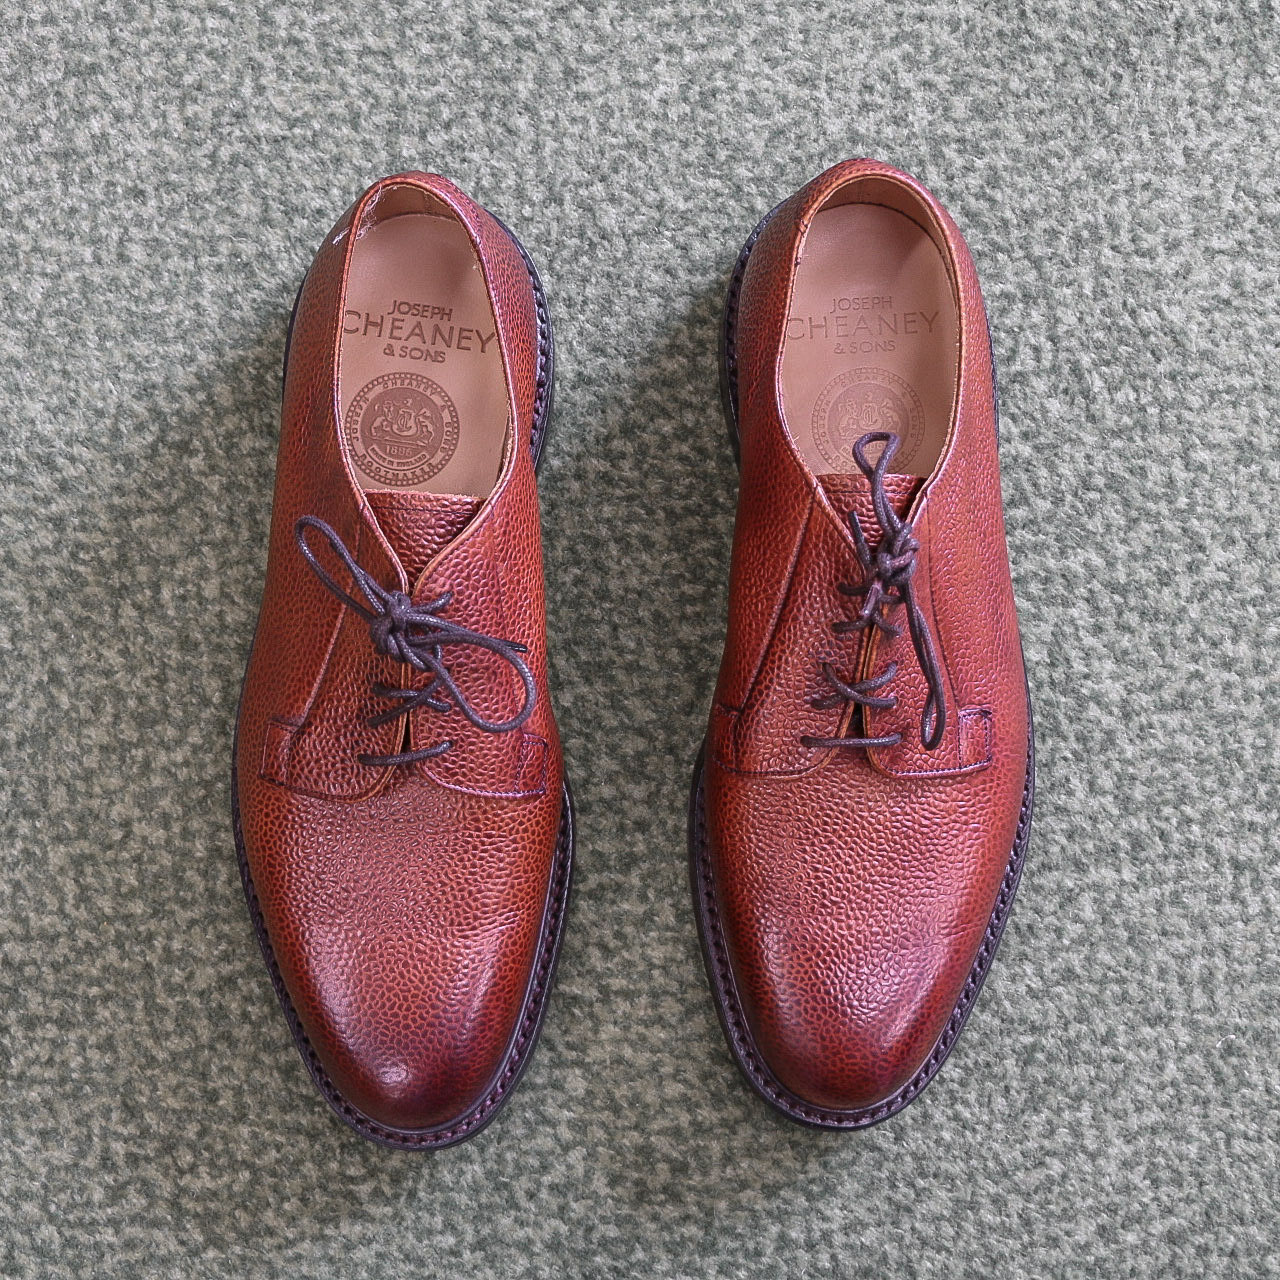 Joseph Cheaney & Sons Deal II R Derby in Mahogany Grain Leather